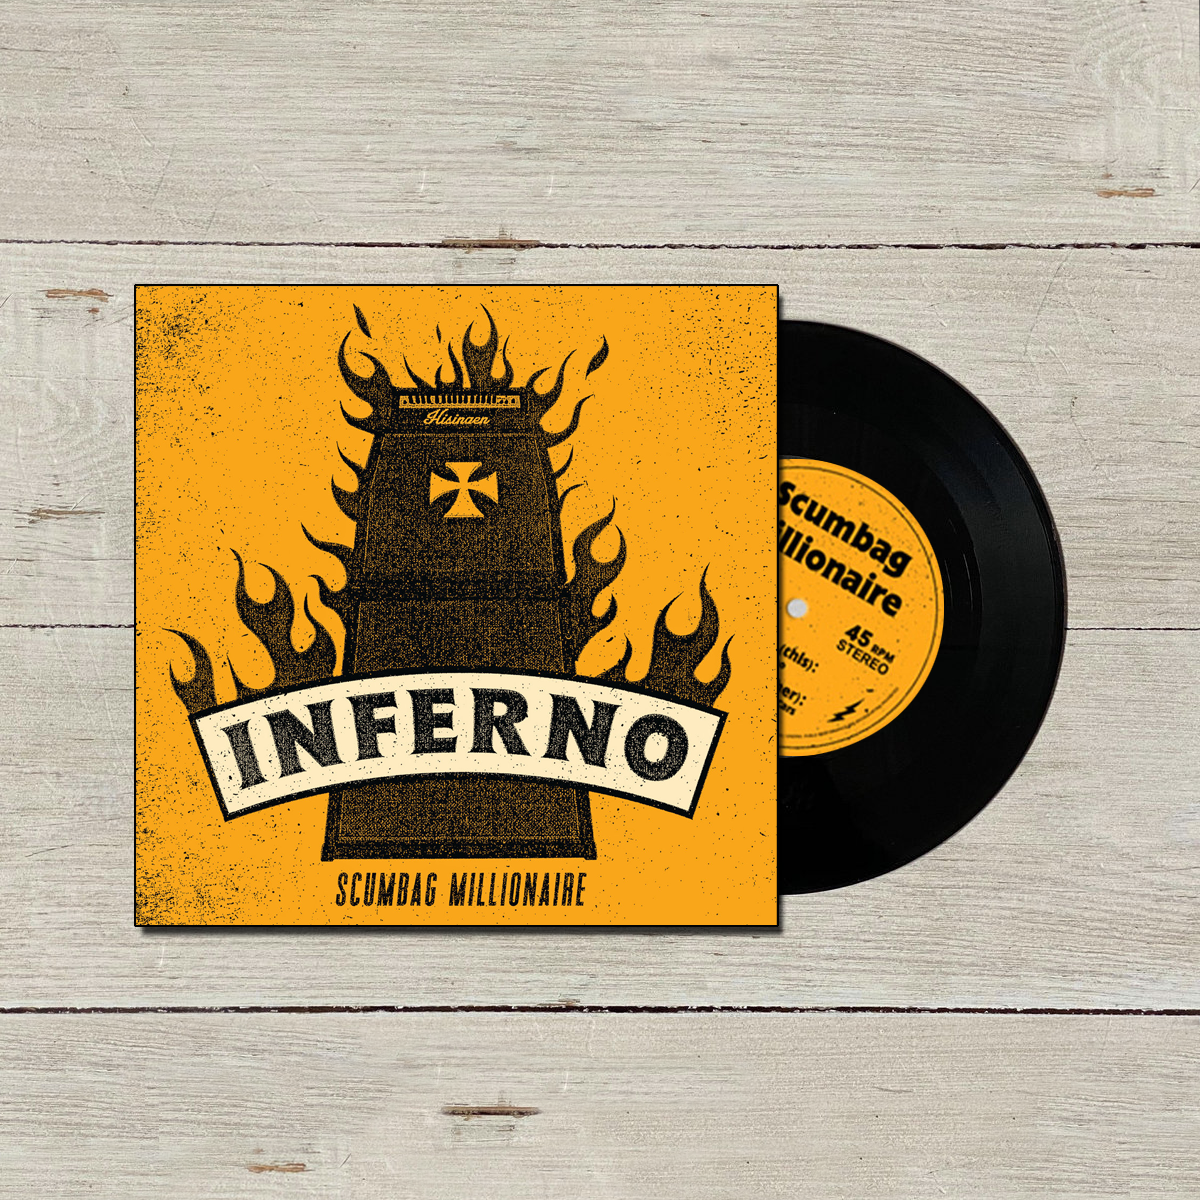 Scumbag Millionaire- Inferno 7" ~HELLACOPTERS!